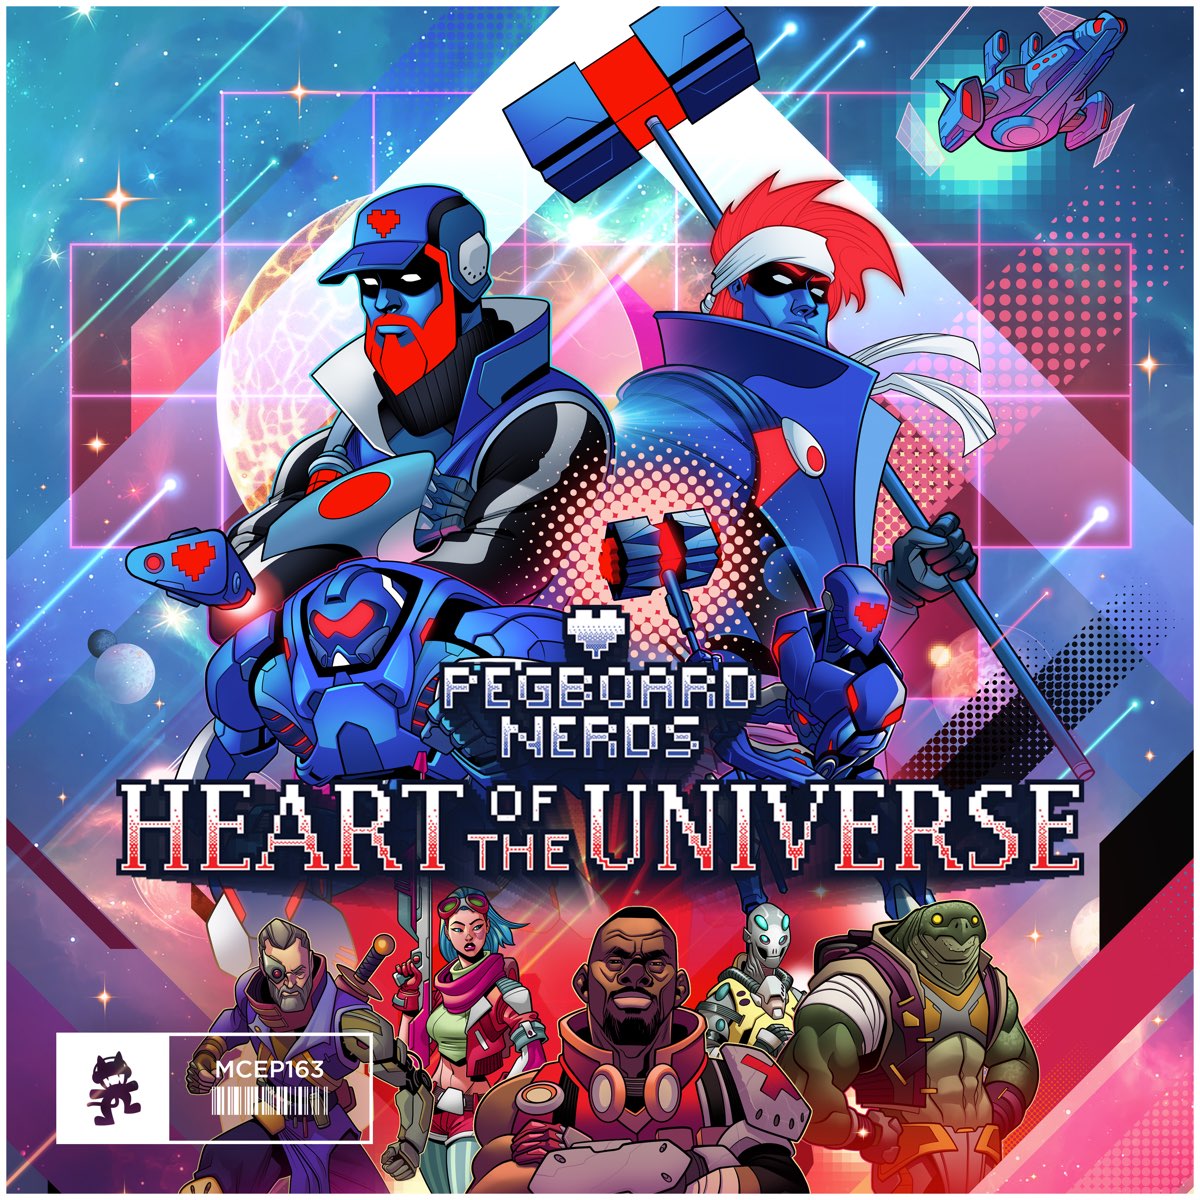 Heart of the Universe - EP by Pegboard Nerds on Apple Music